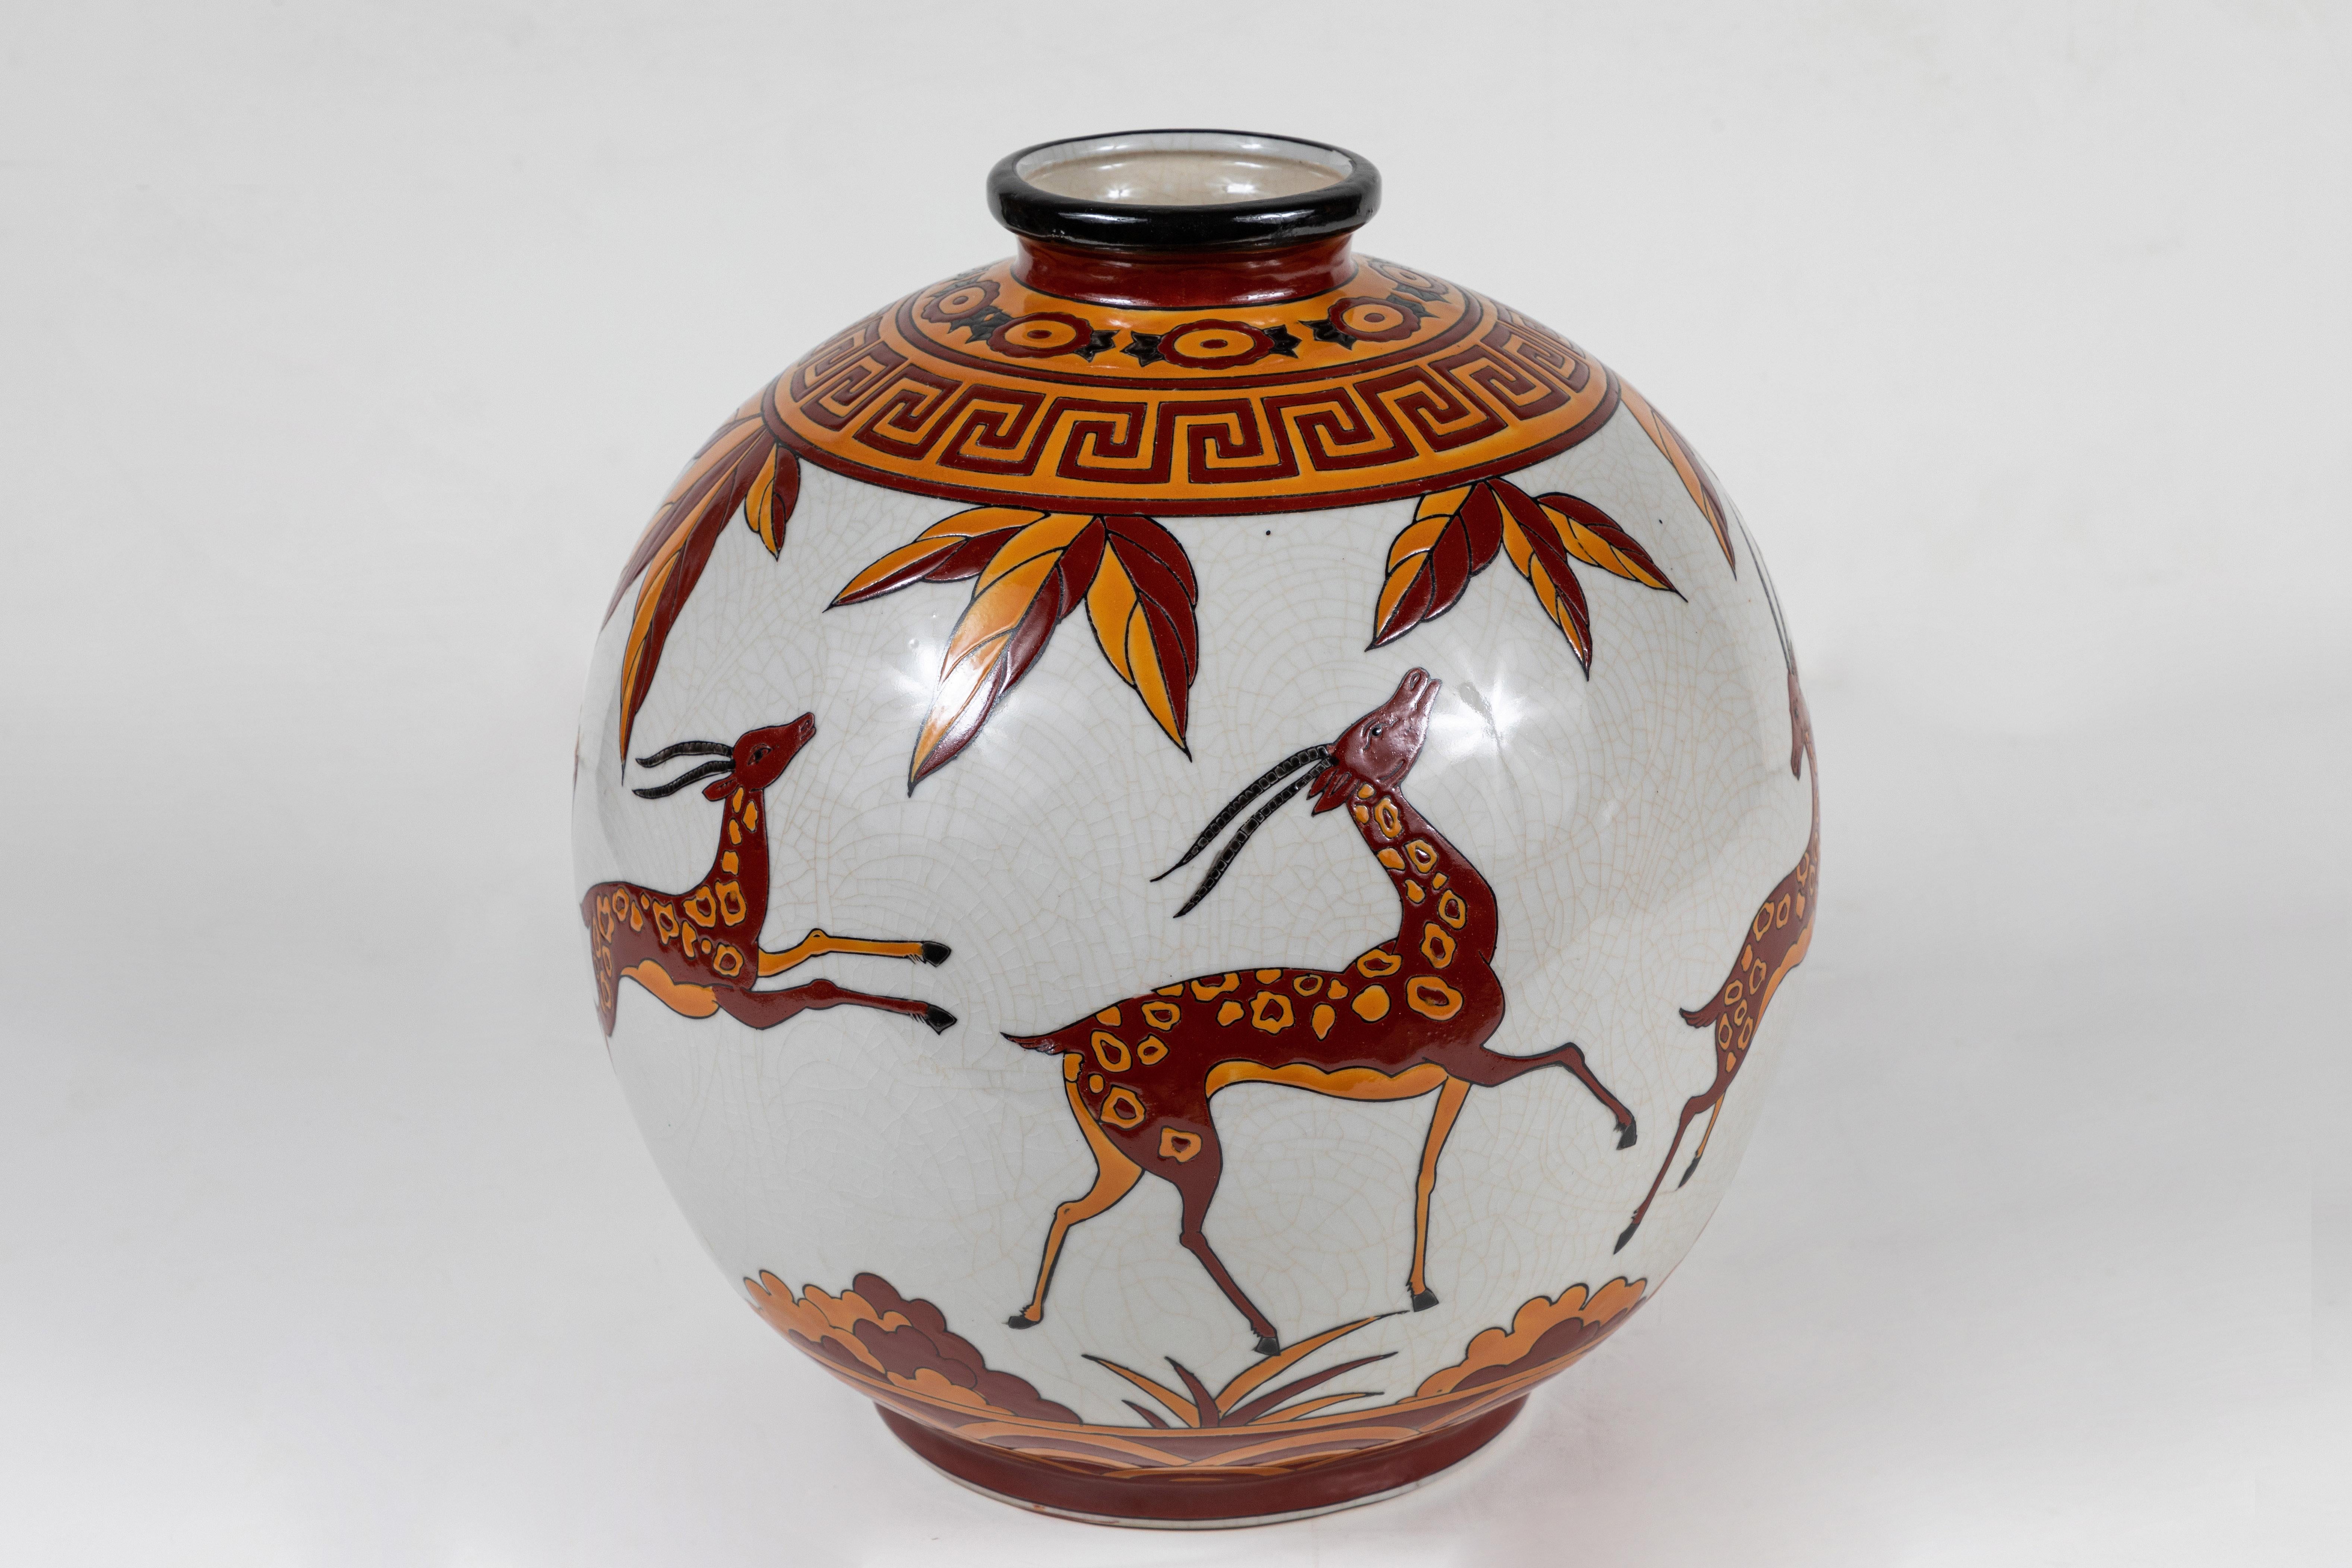 A wonderful pair of globe form vases in the Art Deco style, enameled and craquelured ceramic from the famous Boch Frères Keramis foundry in La Louvière, Belgium. Decorated with storks and leaping gazelles amdist foliage. Each marked on their bases.